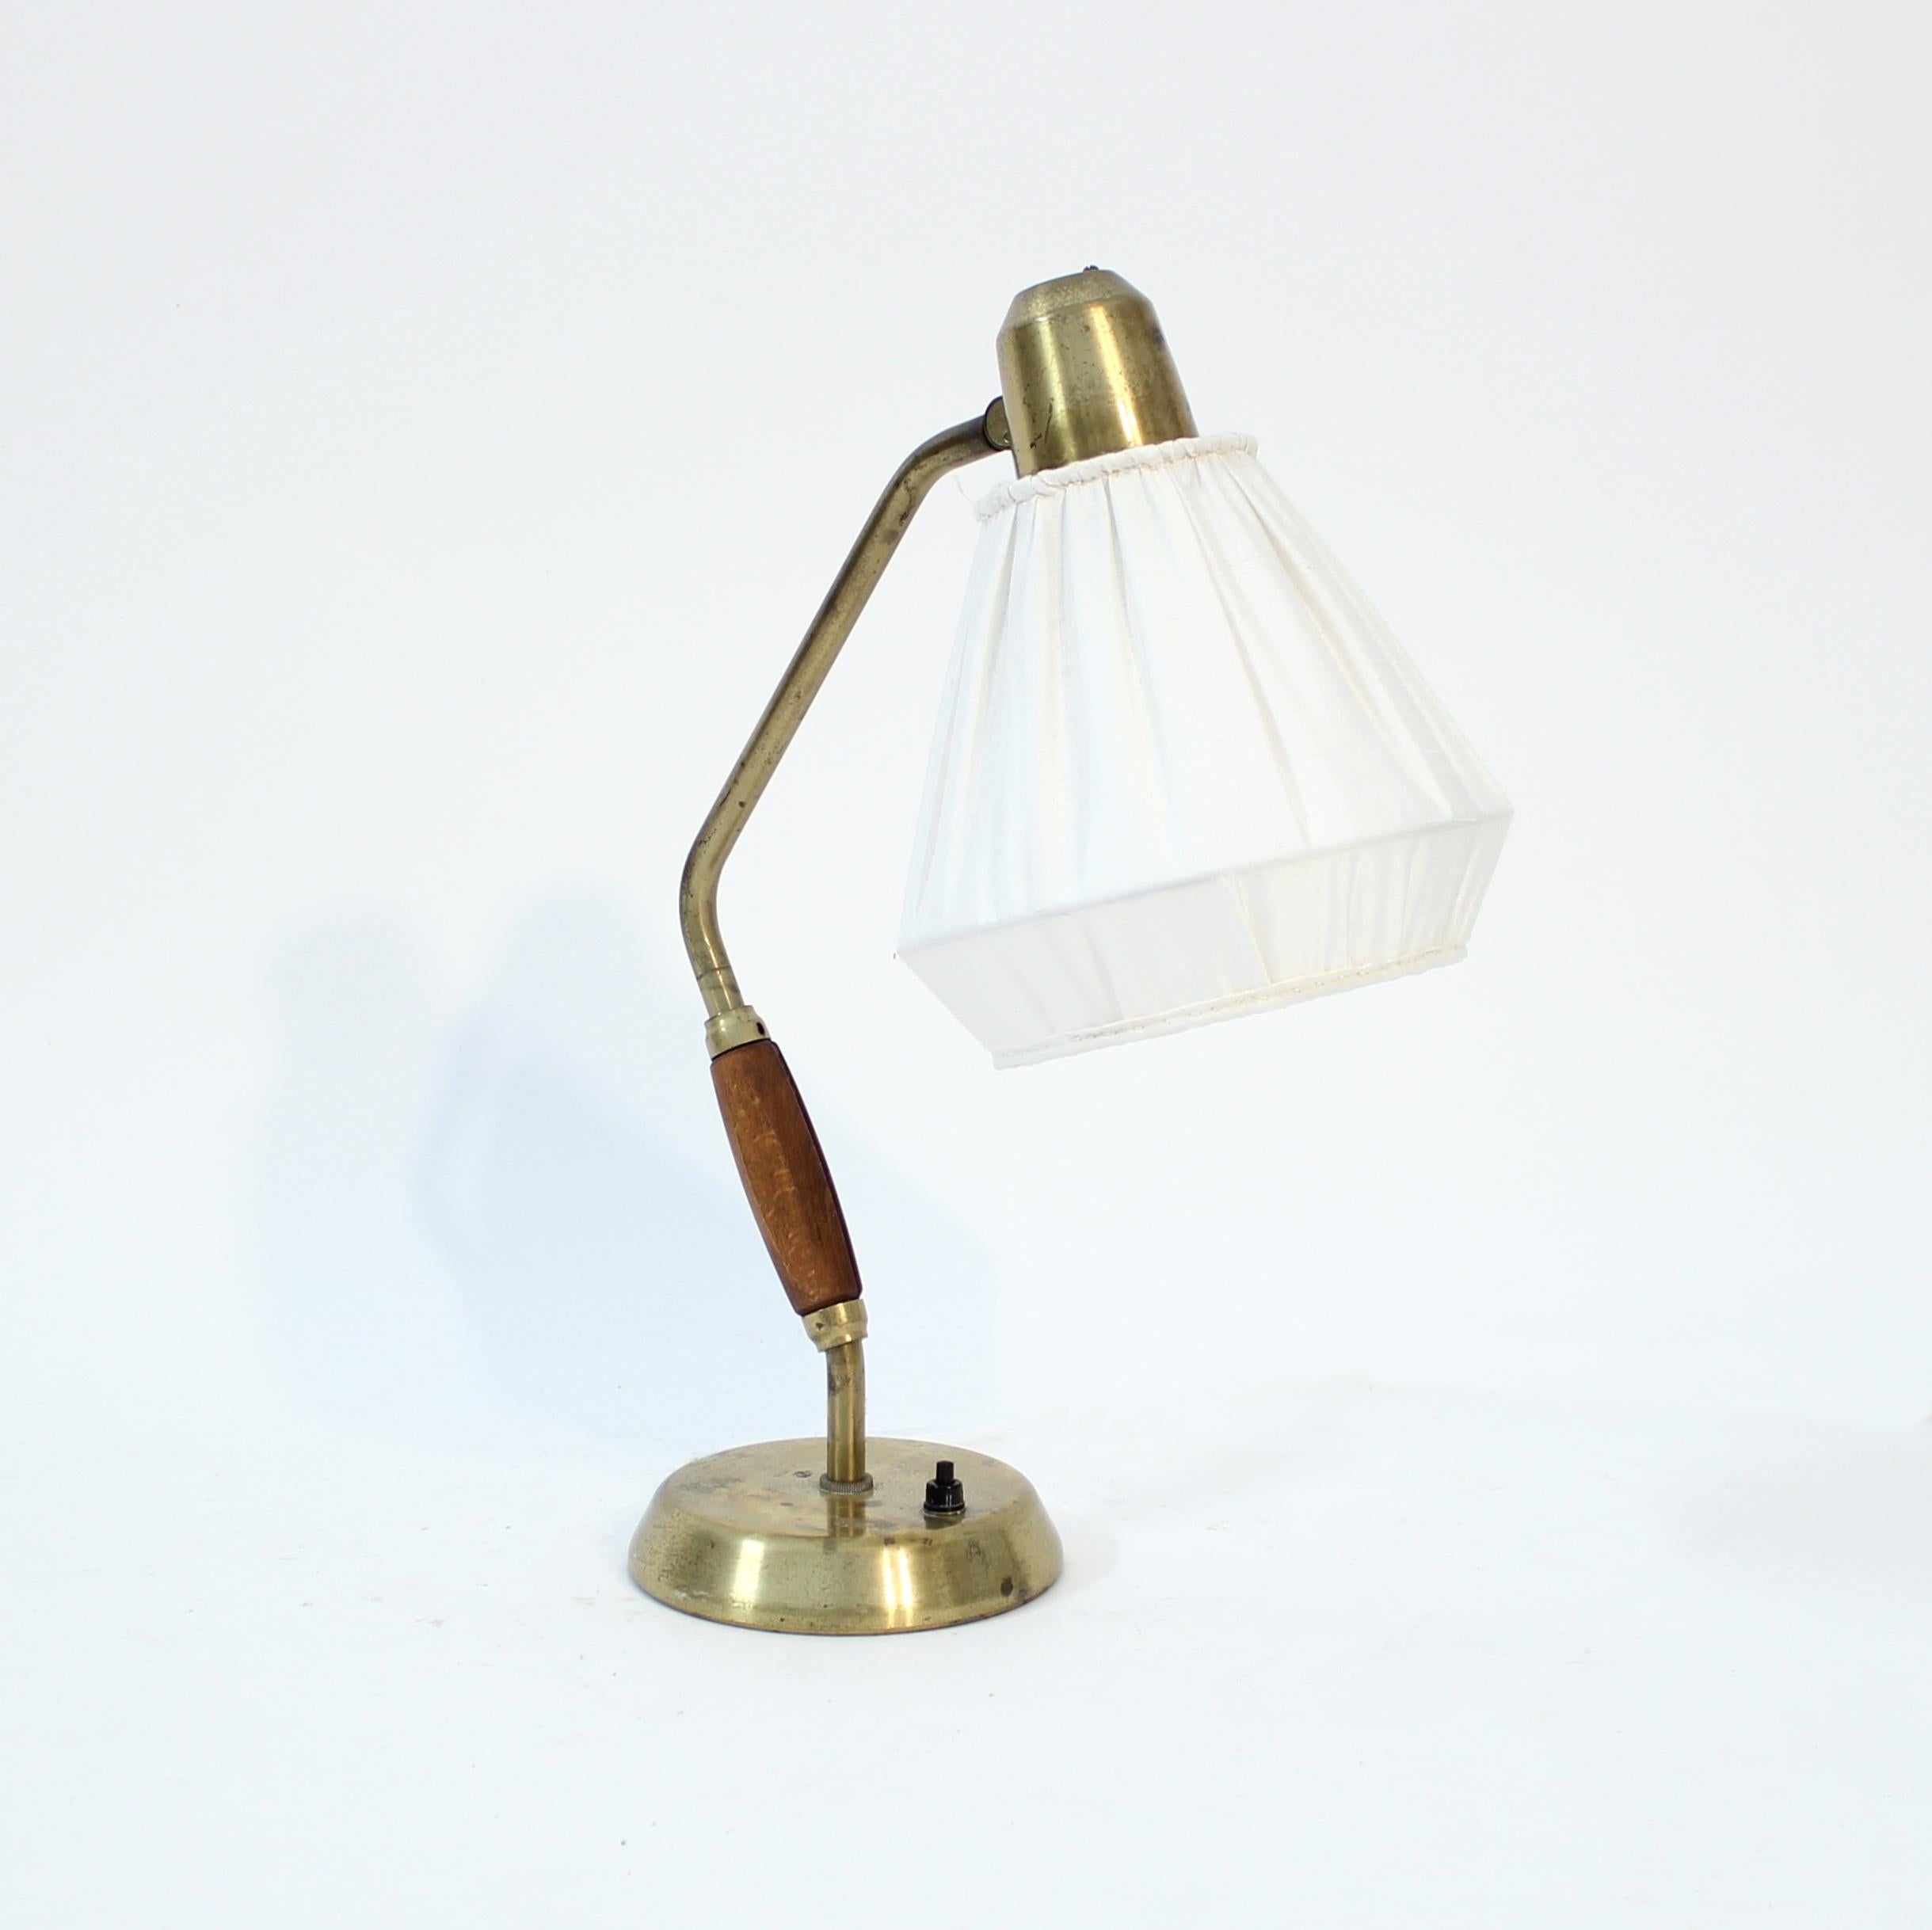 ASEA table or desk lamp in brass with teak handle and white shade. The light switch is on the base. Good untouched vintage condition with light ware and patina consistent with age and use.